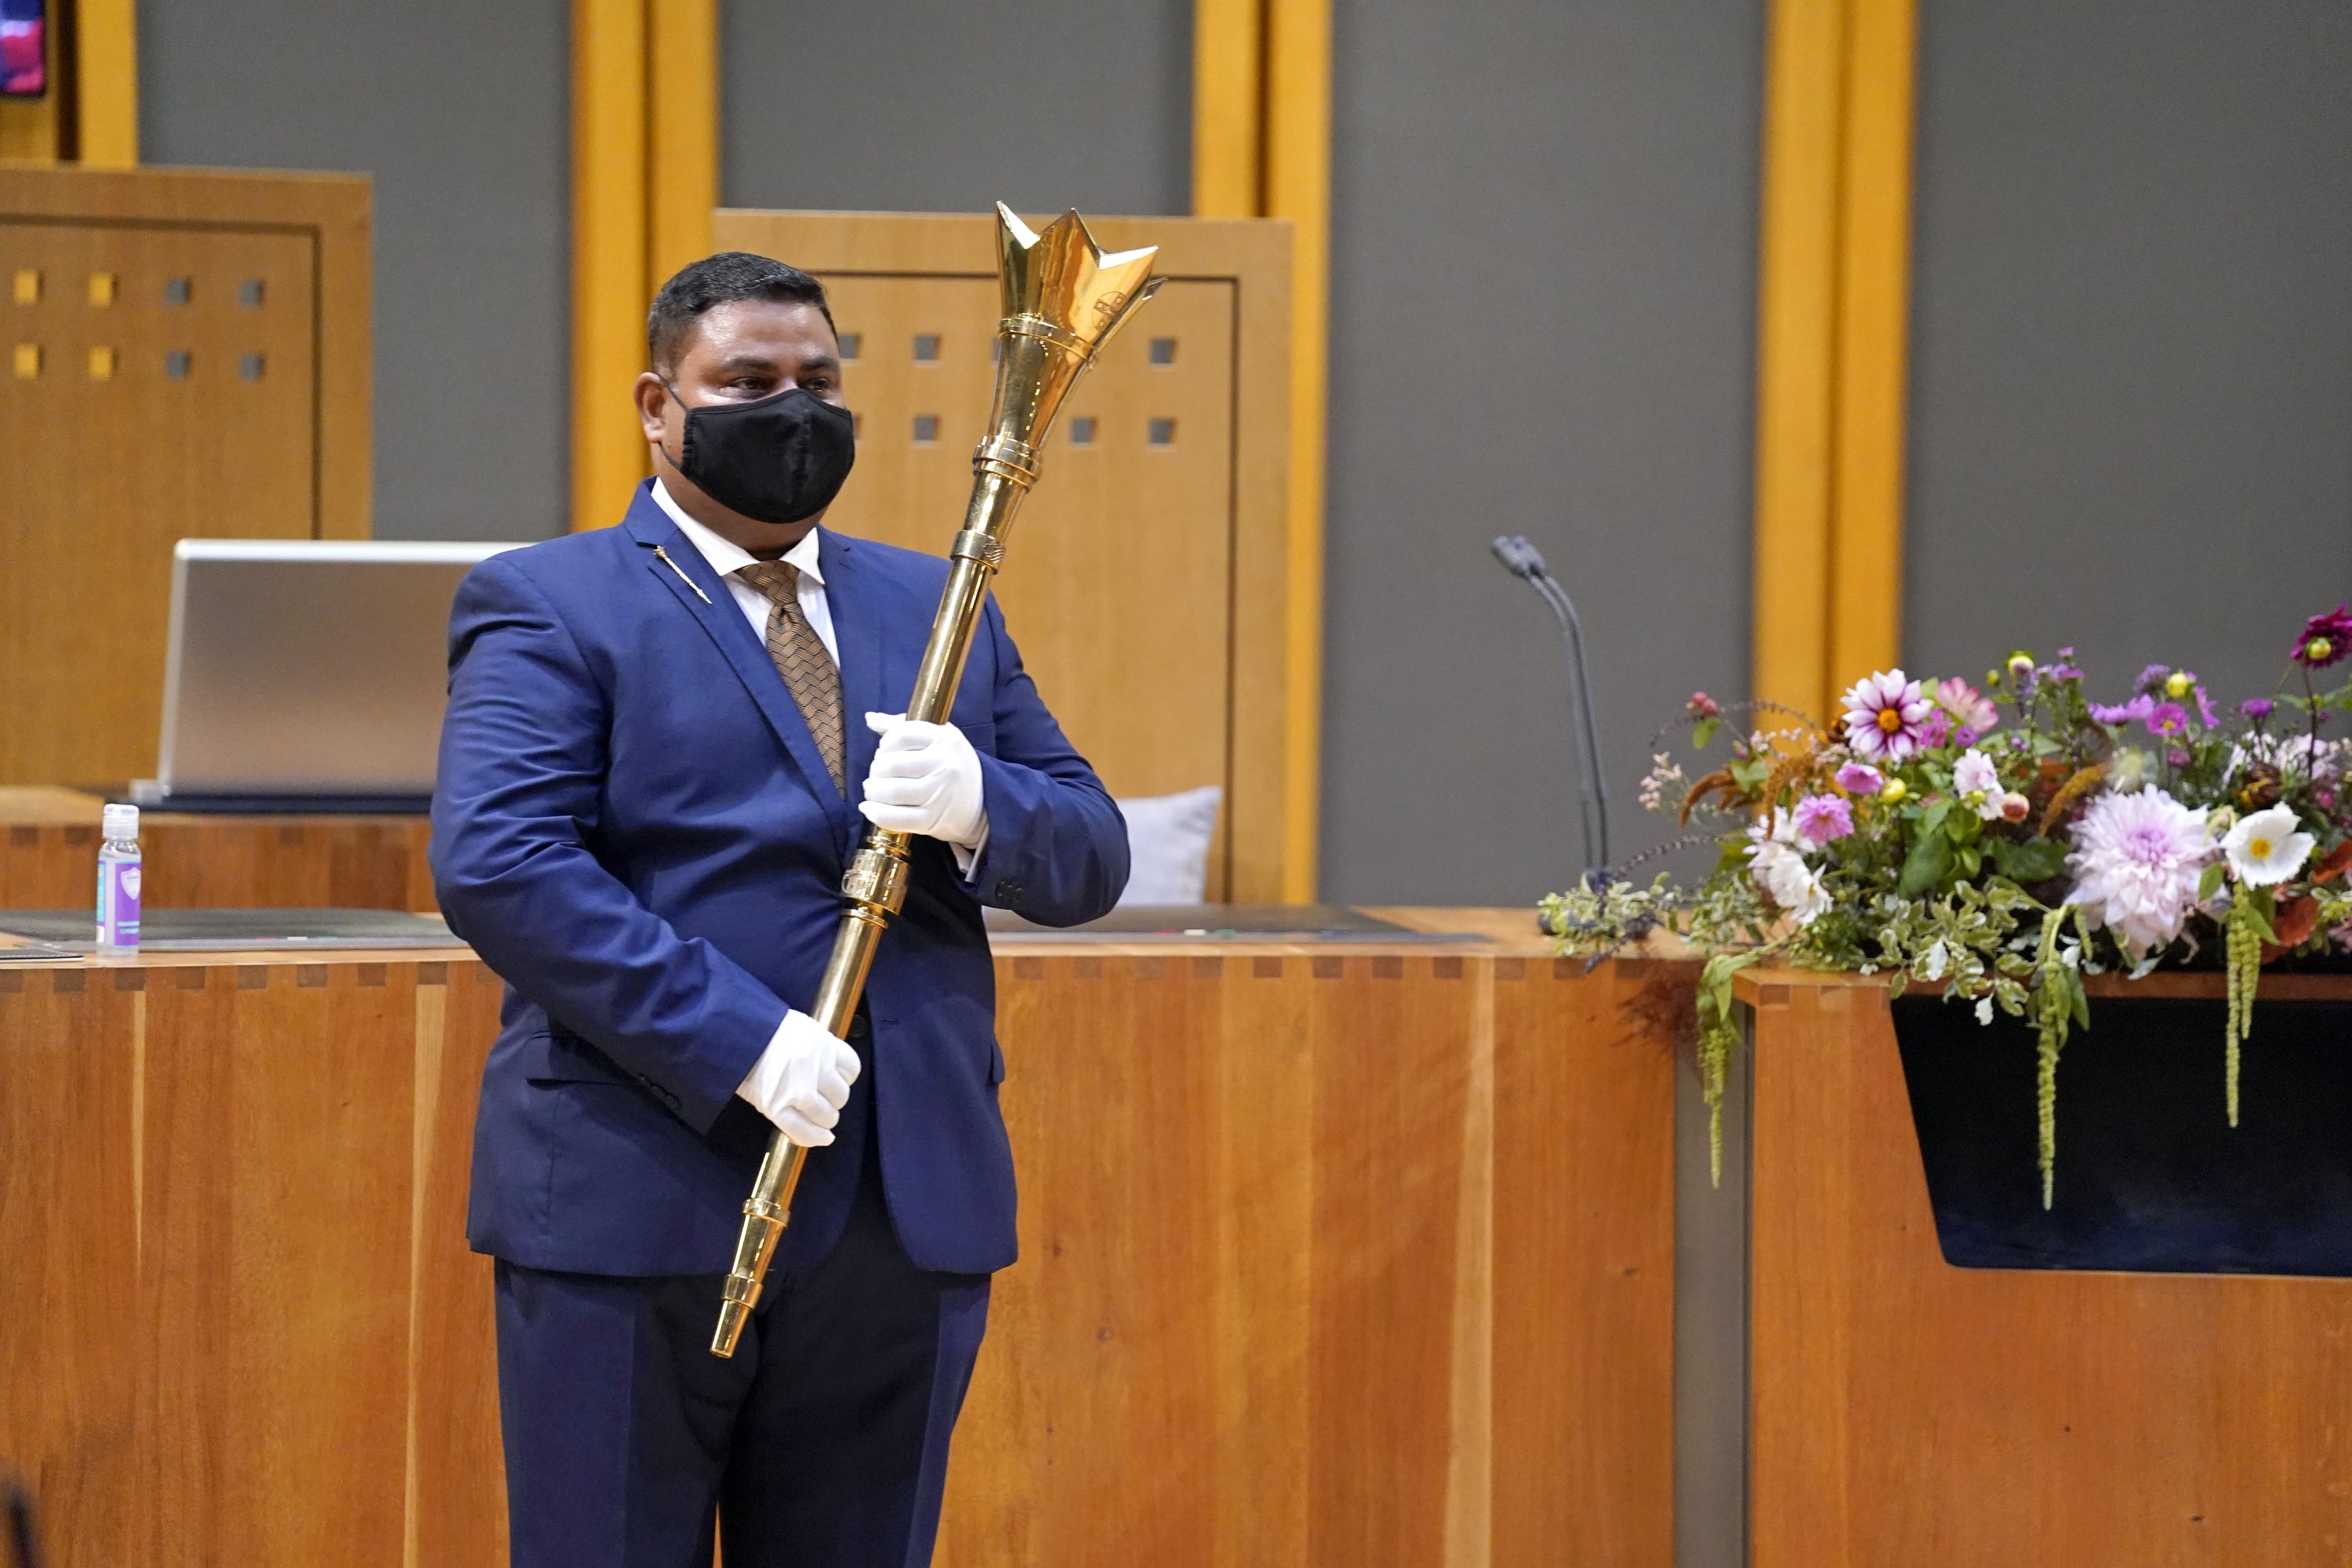 Shahzad Khan carried the ceremonial mace at the opening of the sixth Senedd in Cardiff last year (Andrew Matthews/PA)